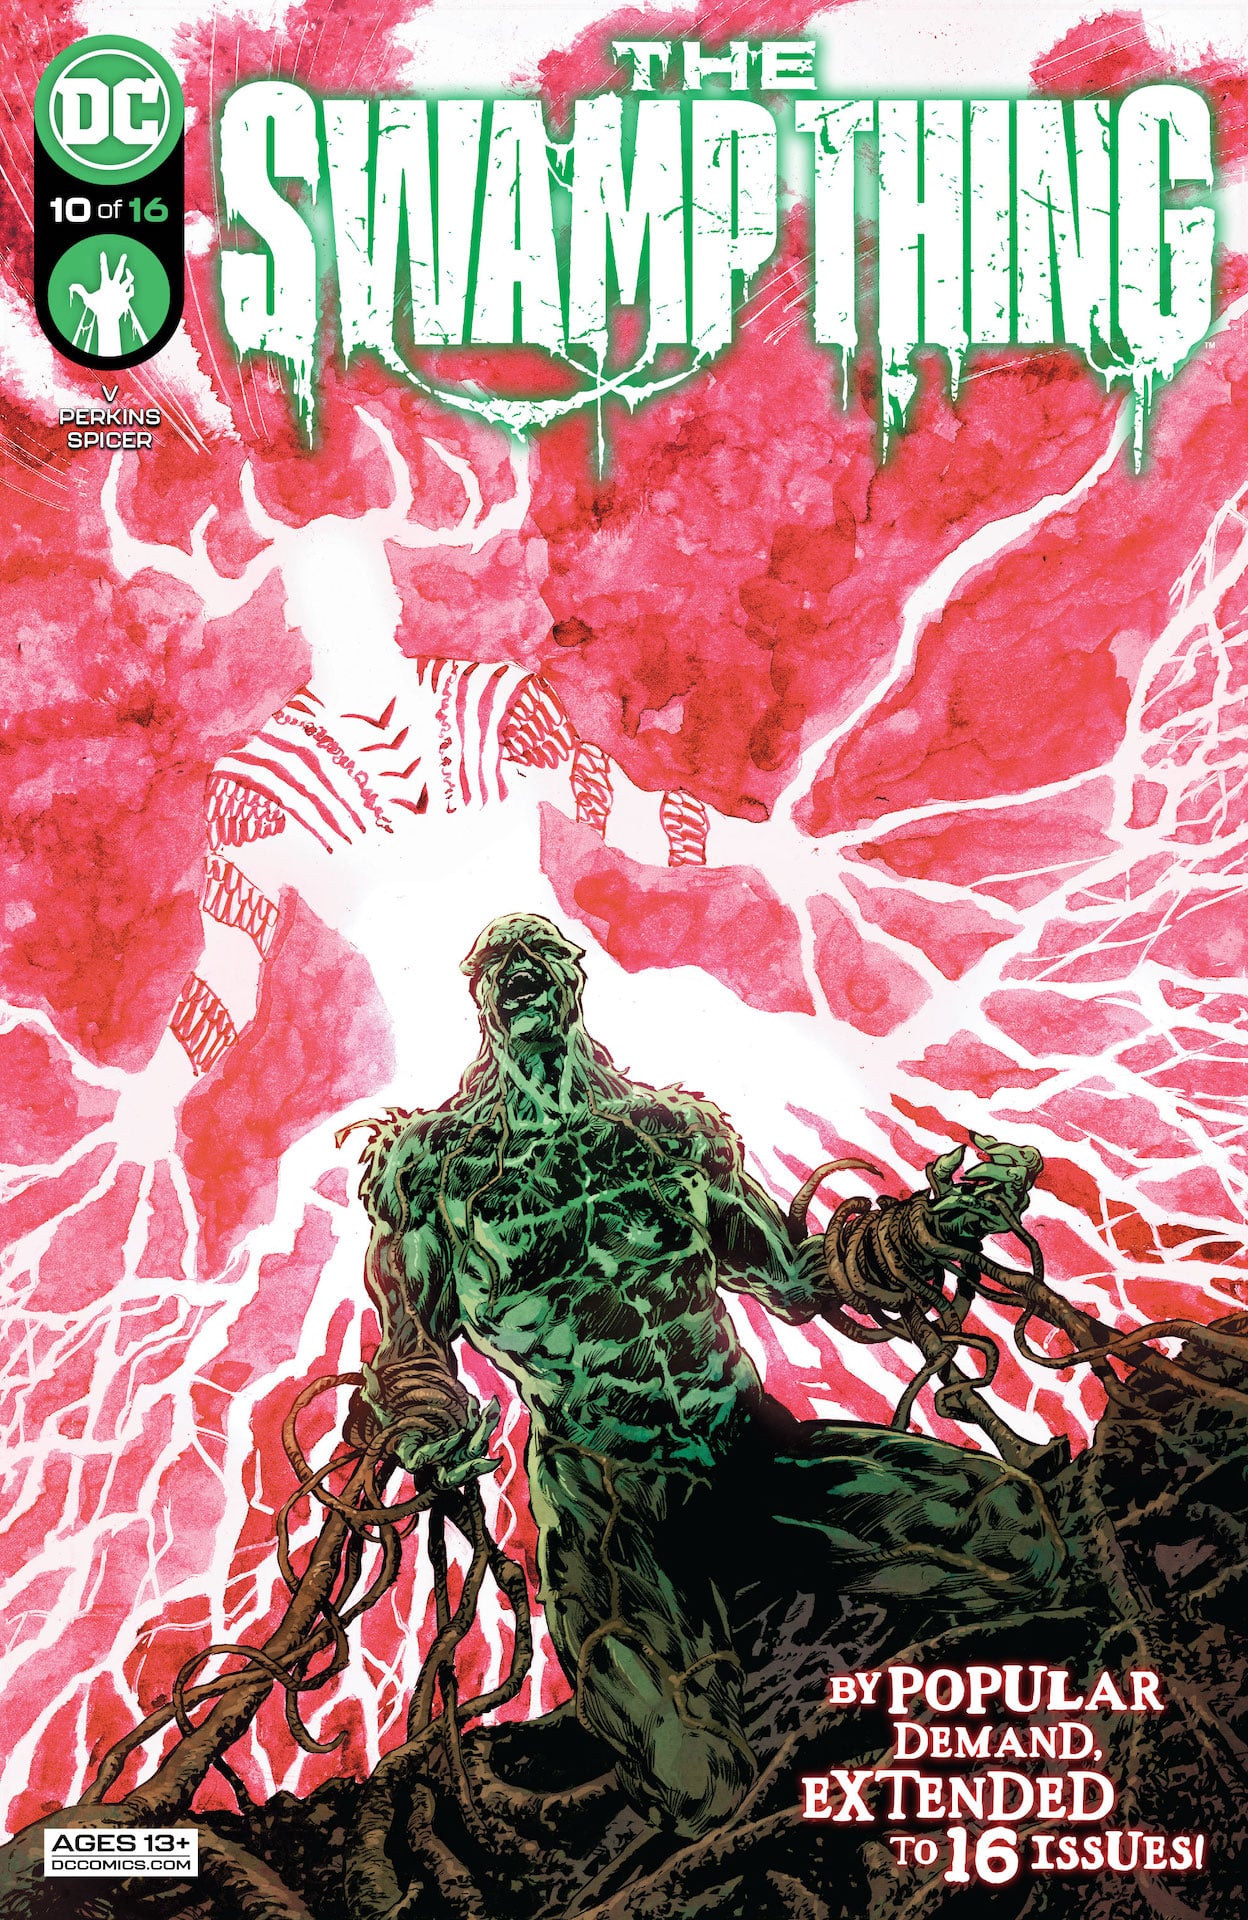 DC Preview: Swamp Thing #10